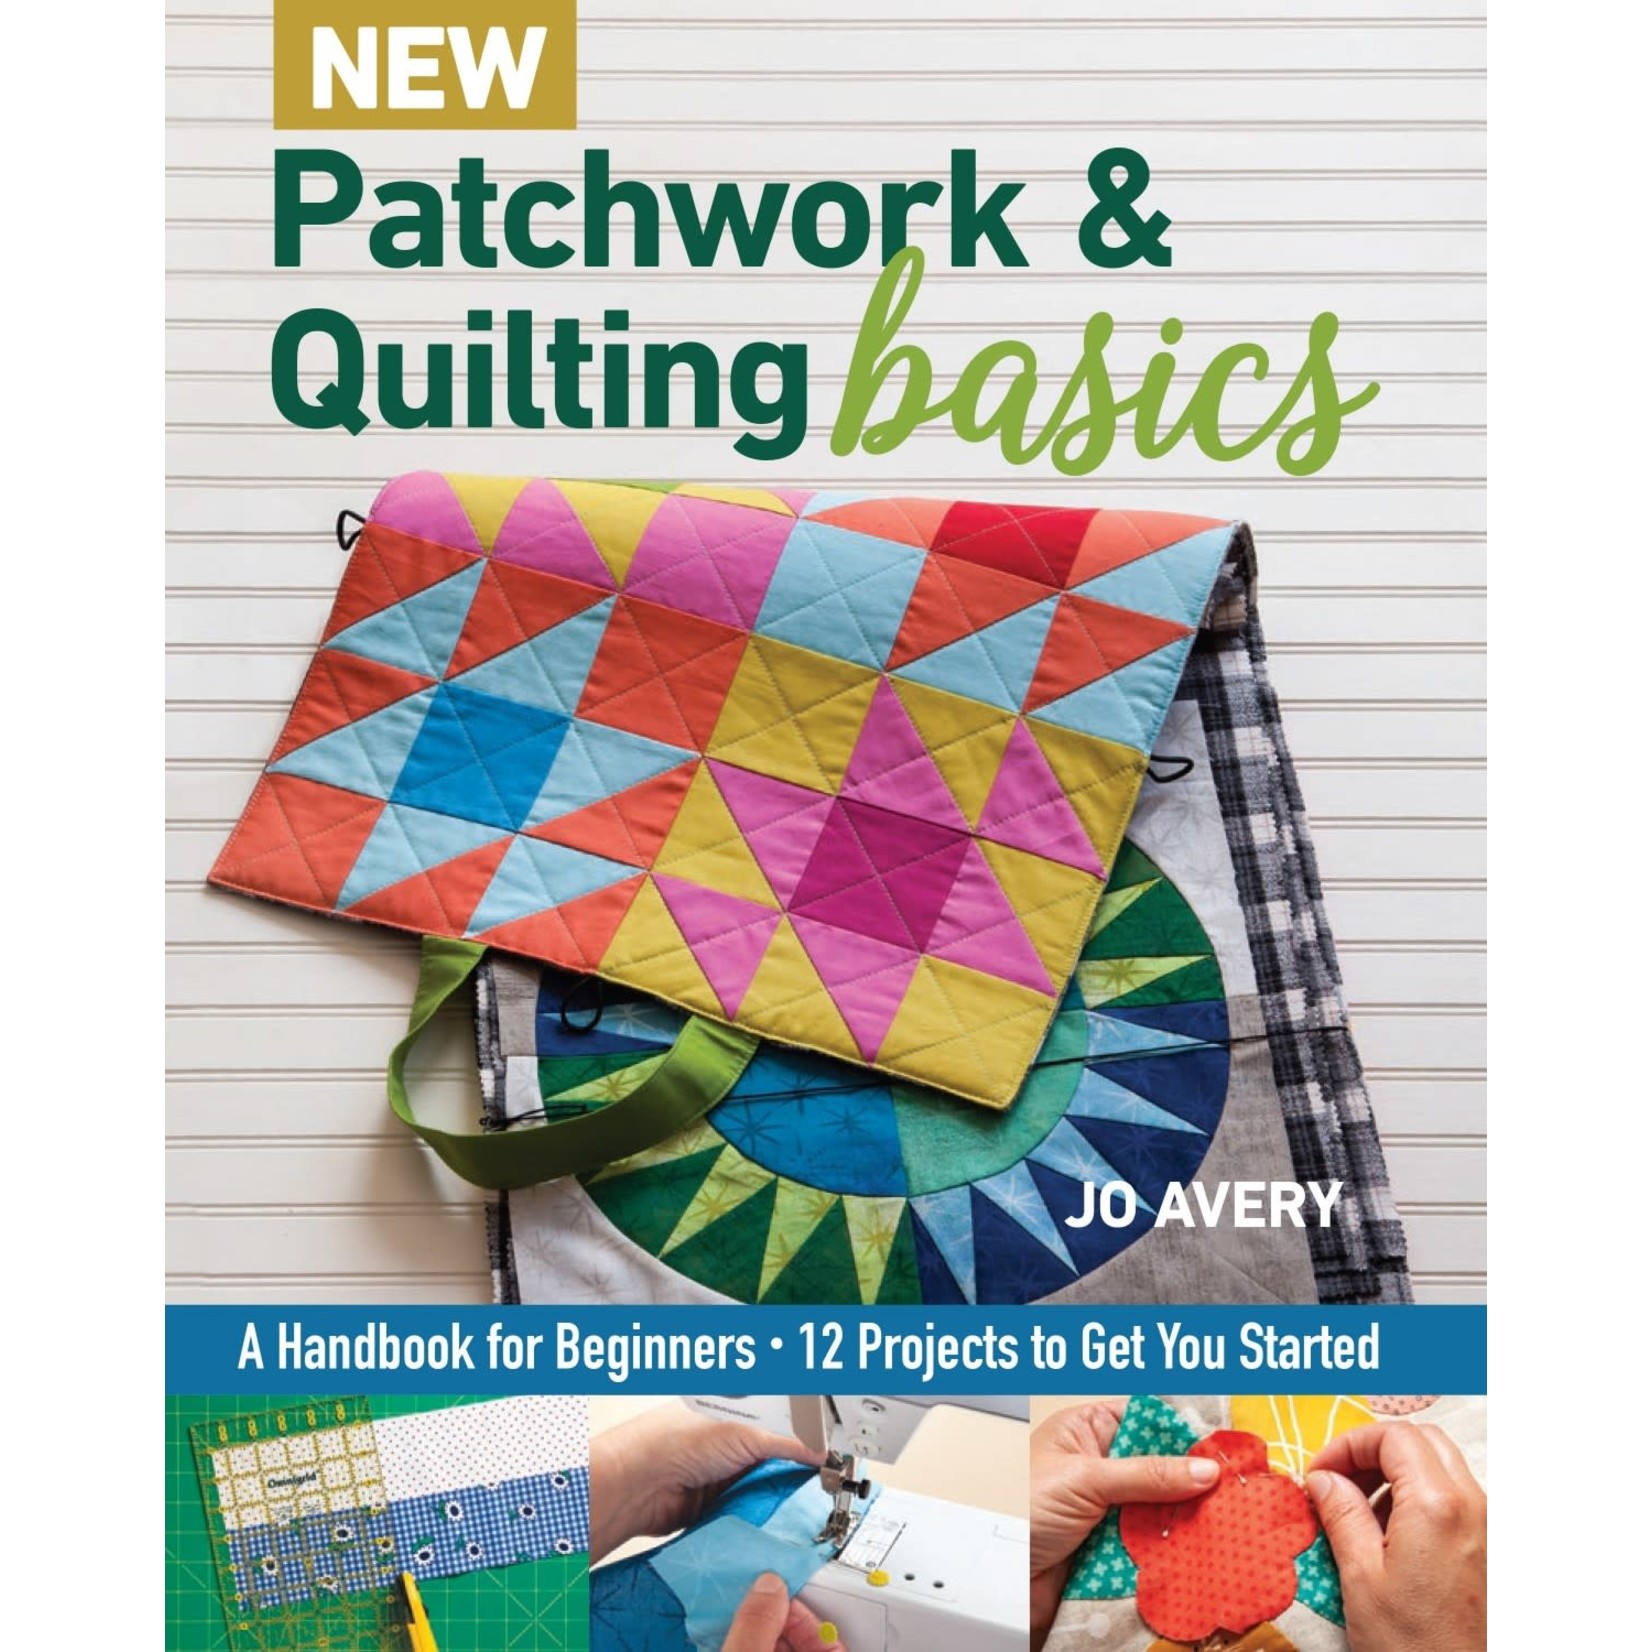 Stash Books Patchwork & Quilting basics by Jo Avery